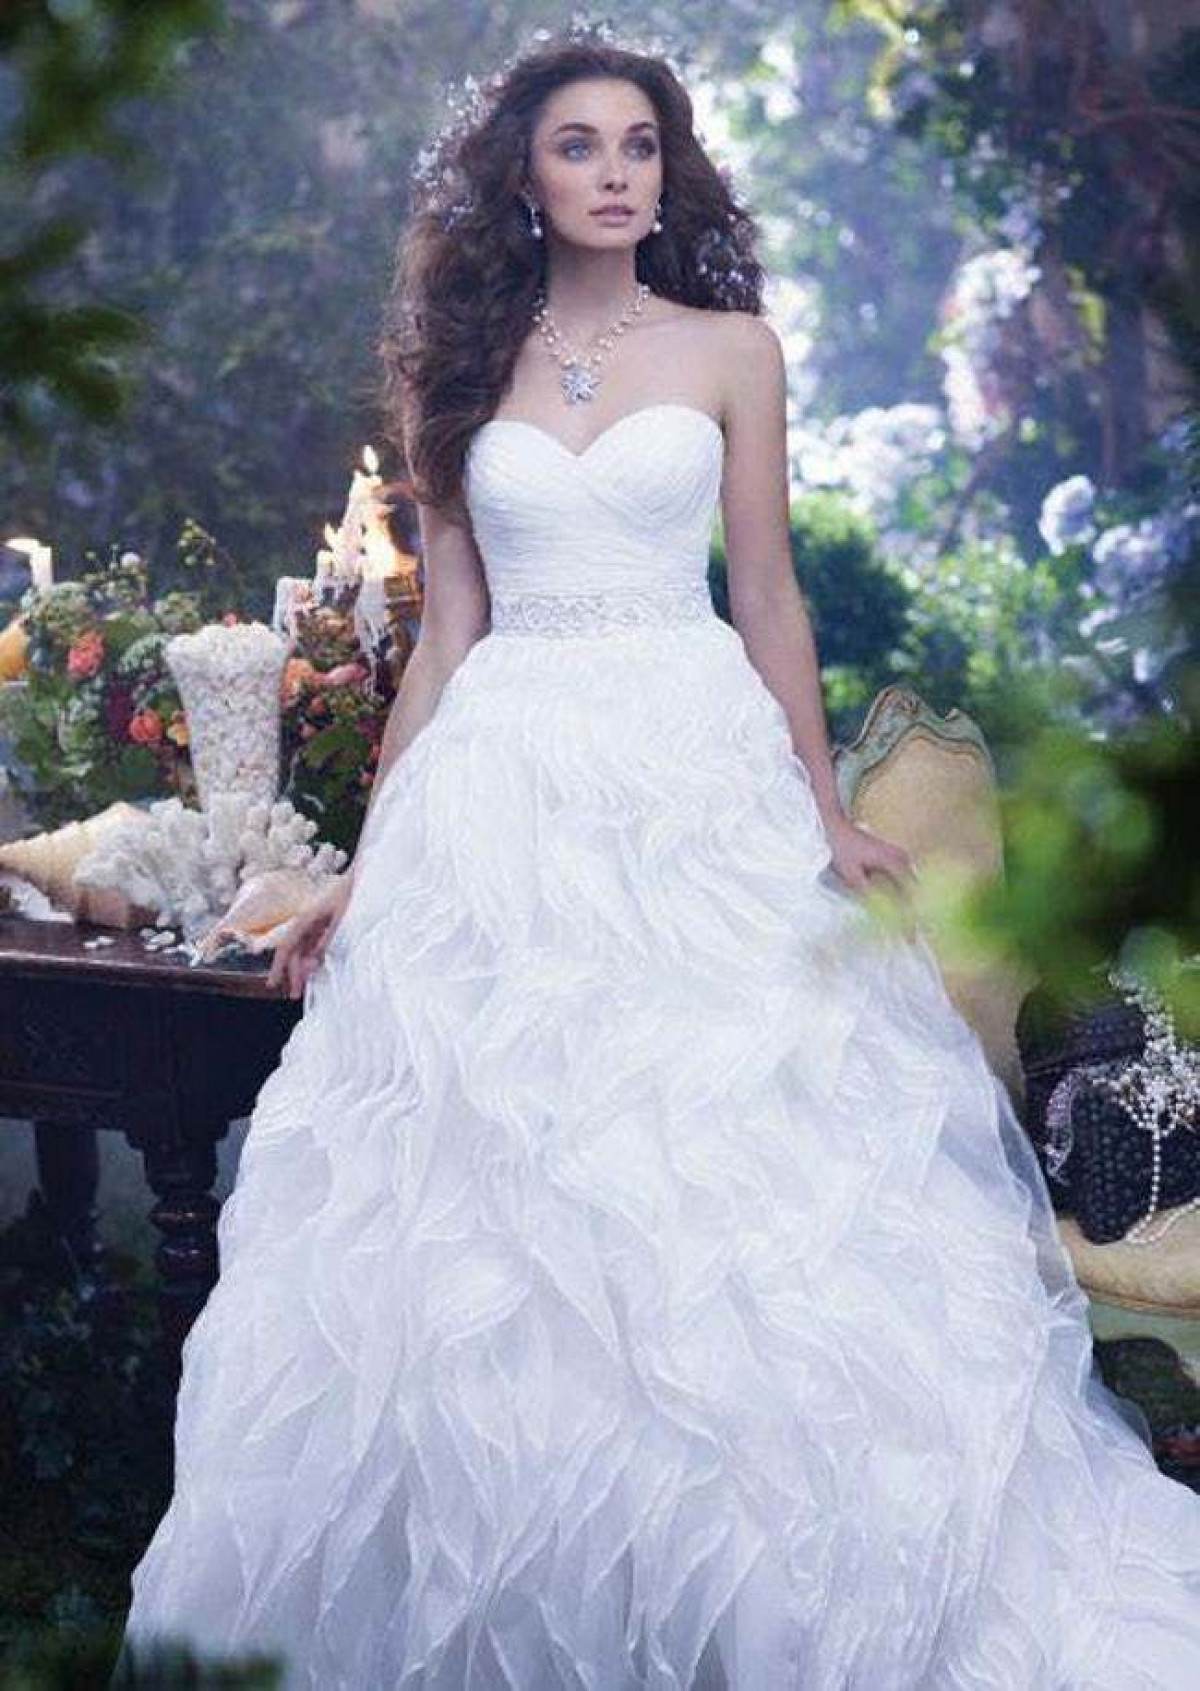 15 Of The Most Beautiful Disney Inspired Wedding Dresses